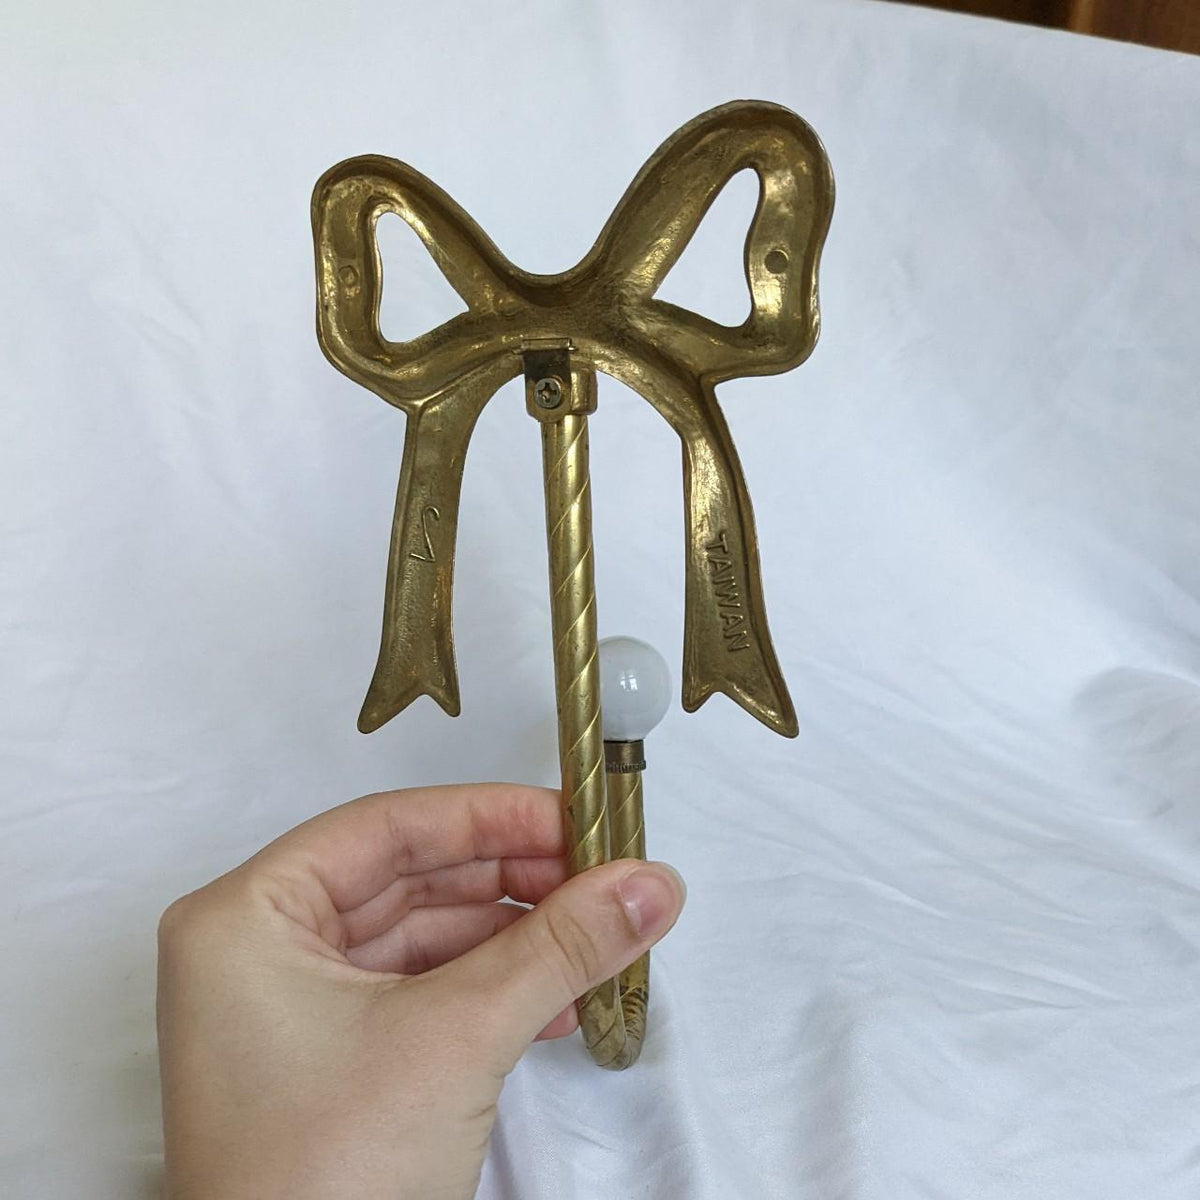 Vintage Hosley Solid Brass Bow Wall Hook Holder New In Package NIP